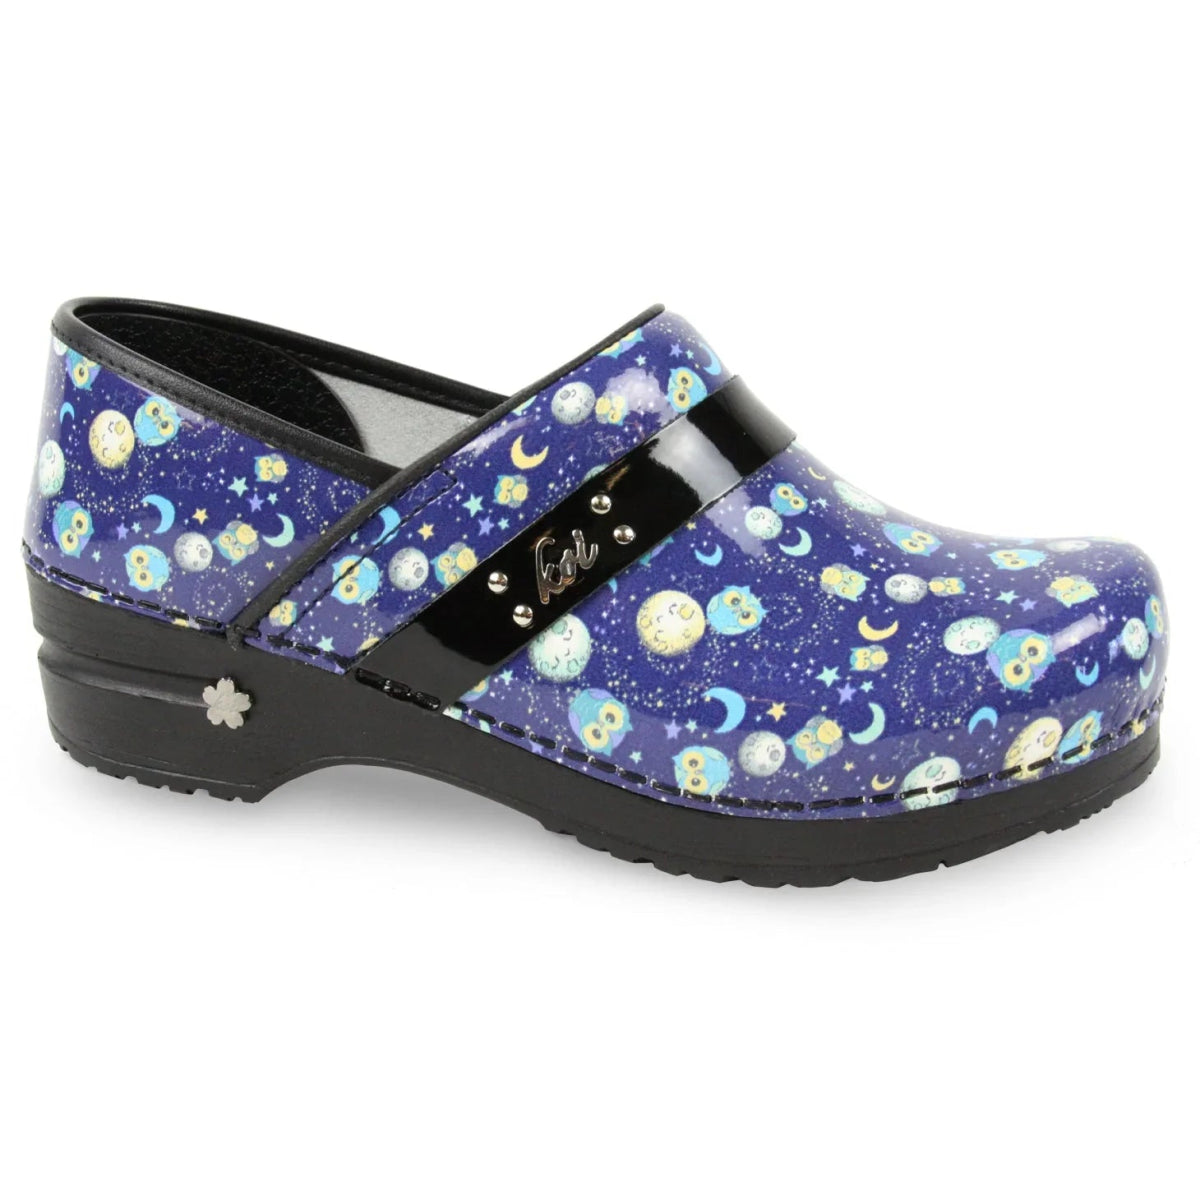 SANITA SPACE OWLS WOMEN CLOG IN NAVY - TLW Shoes